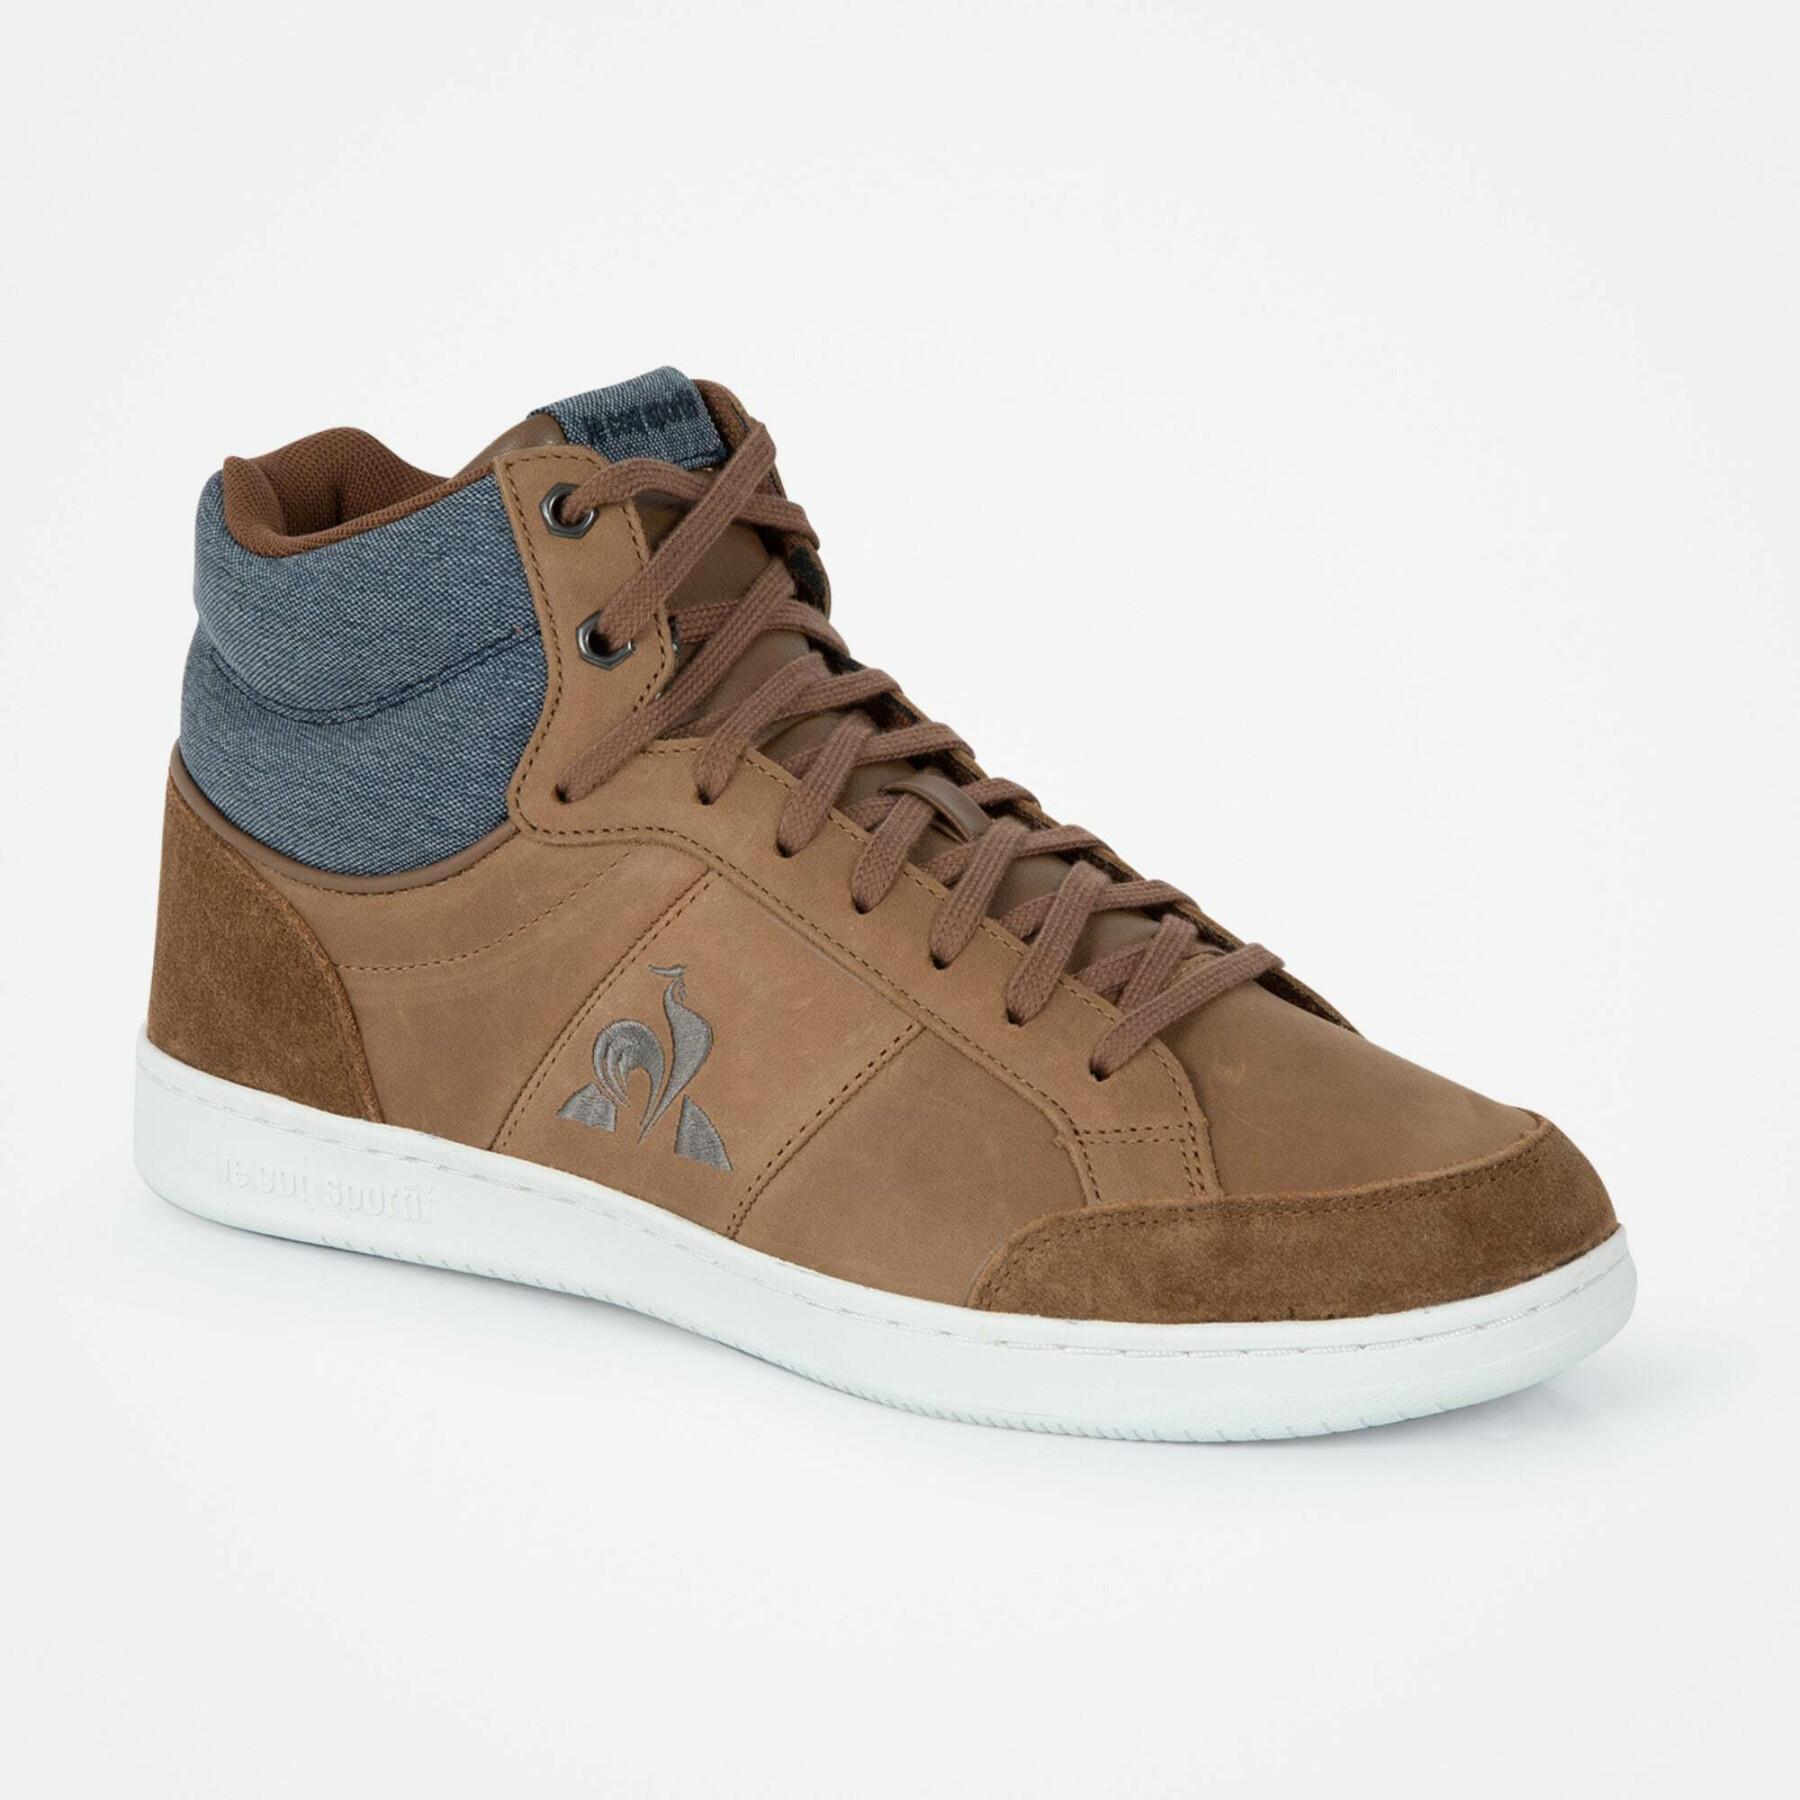 Formadores Le Coq Sportif Court Arena Workwear